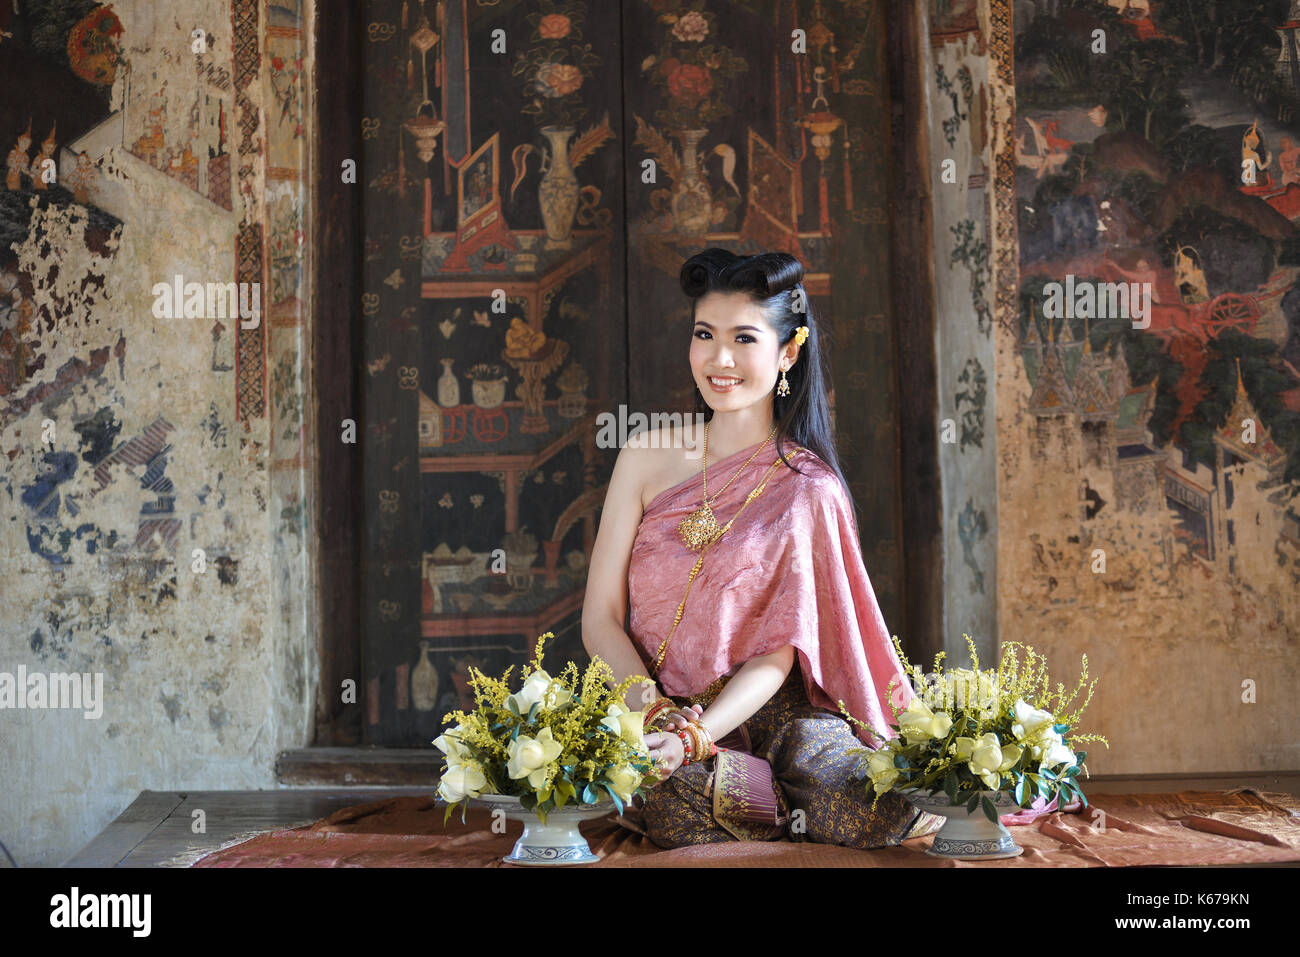 Portrait of a smiling woman in traditional clothing, Thaïlande Banque D'Images